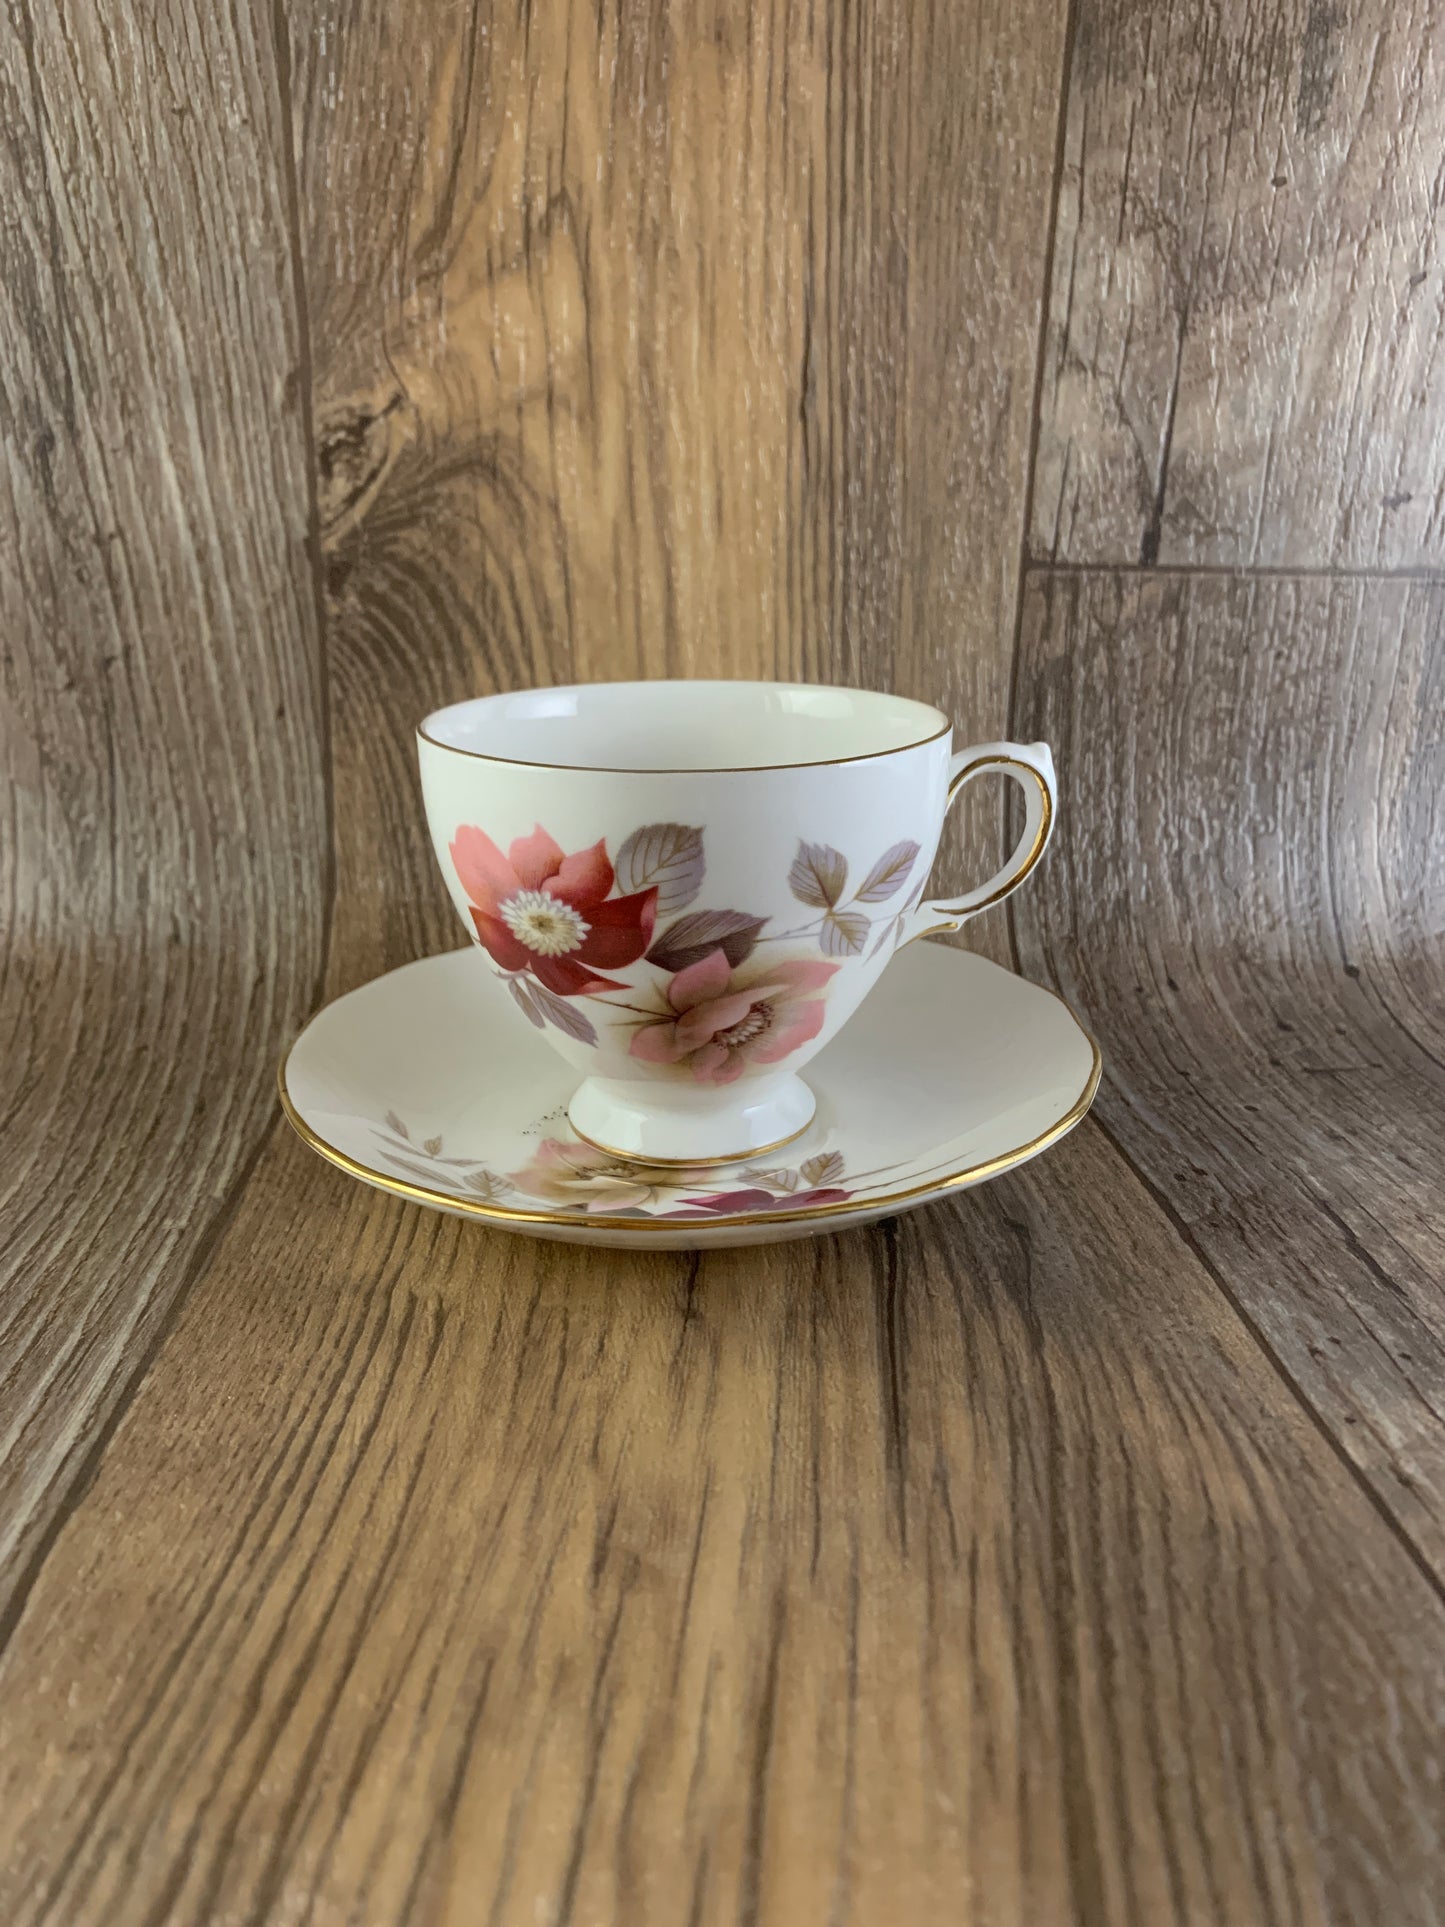 Vintage Royal Vale Tea Cup and Saucer with Pink Roses